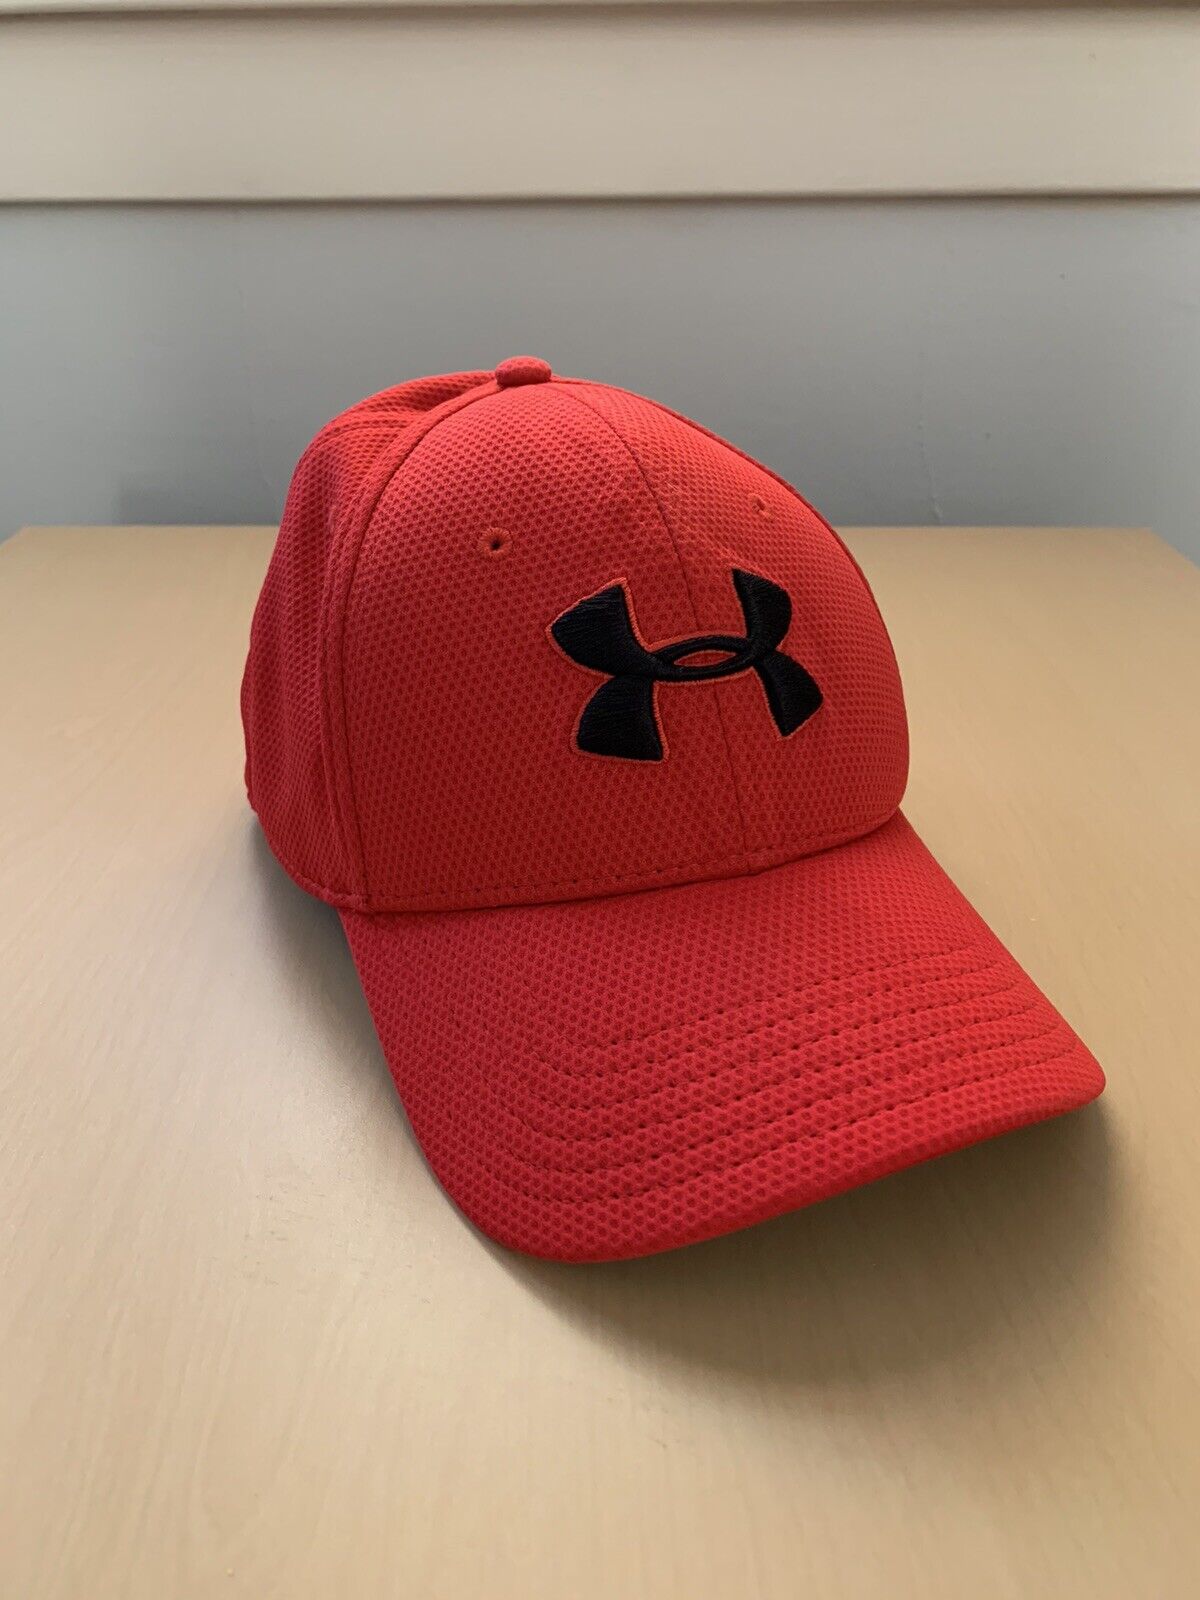 Under Armour Blitzing Stretch Fit Cap UA Hat LG/XL.  Runs small.  Very nice used